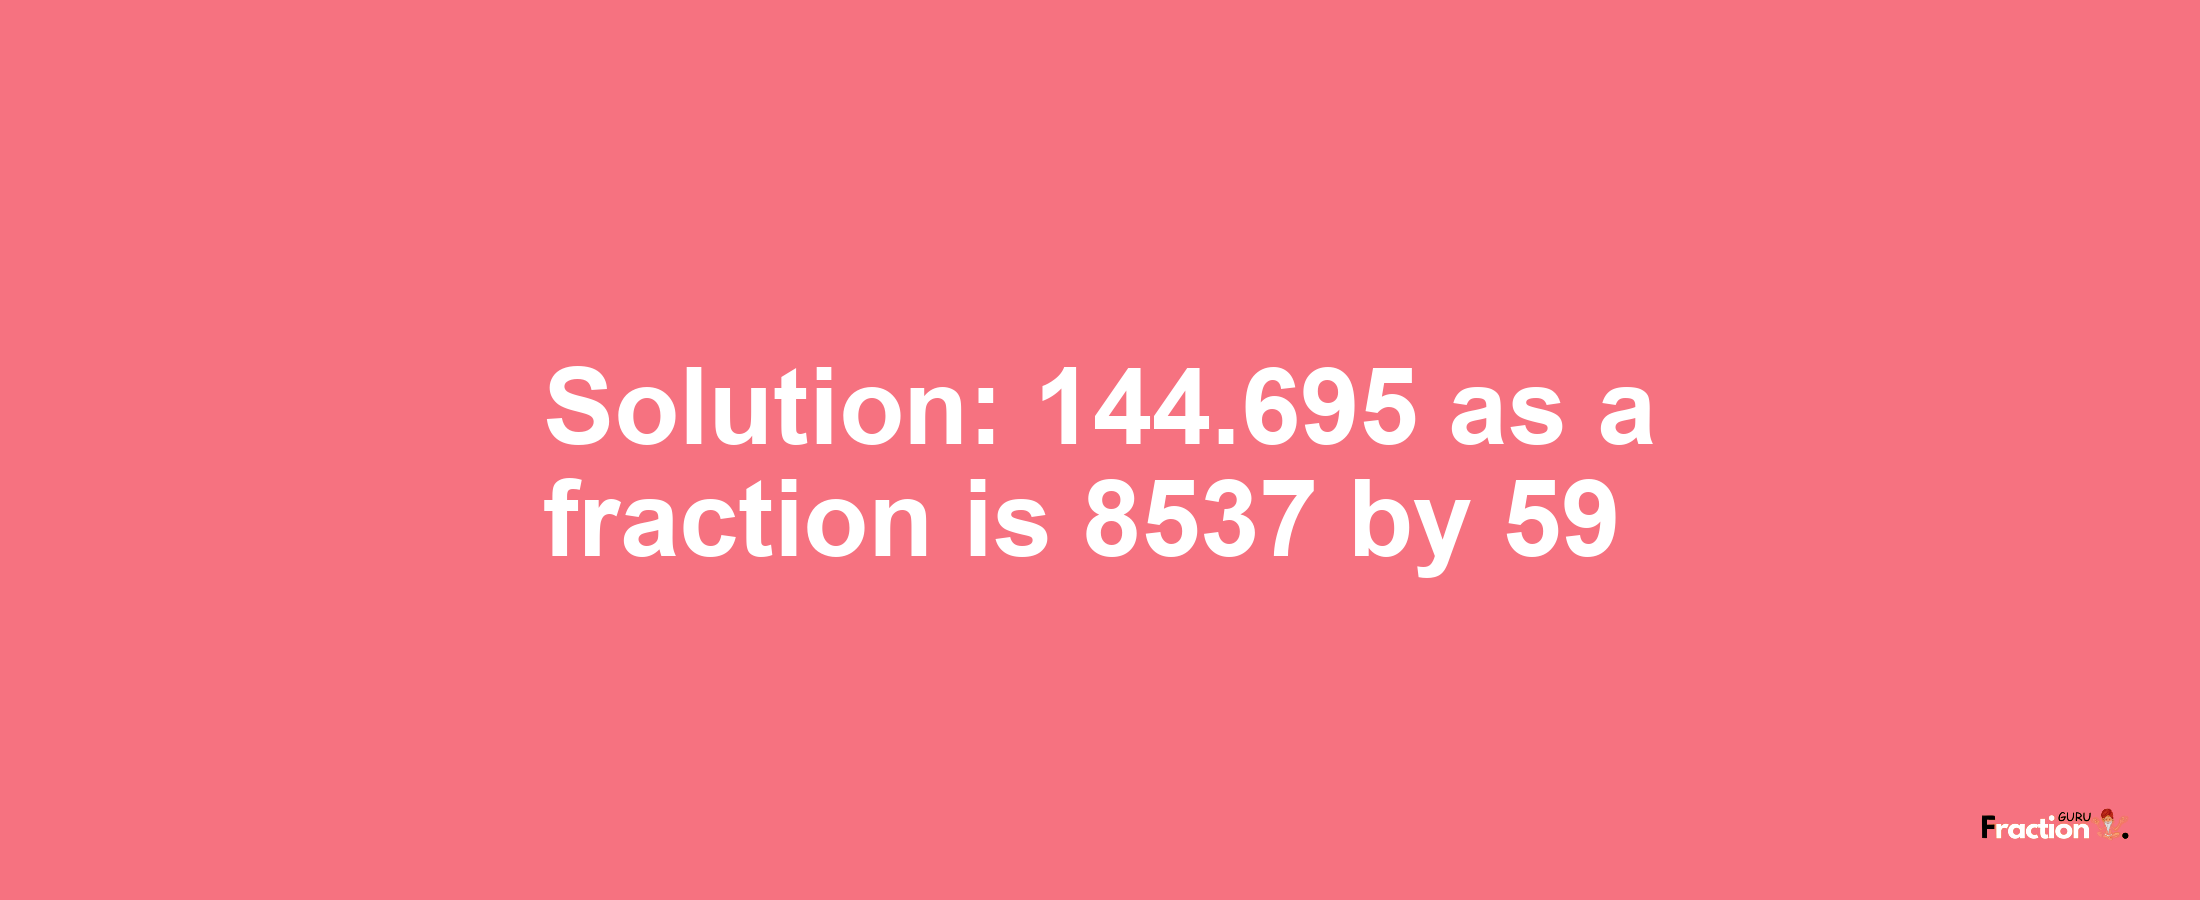 Solution:144.695 as a fraction is 8537/59